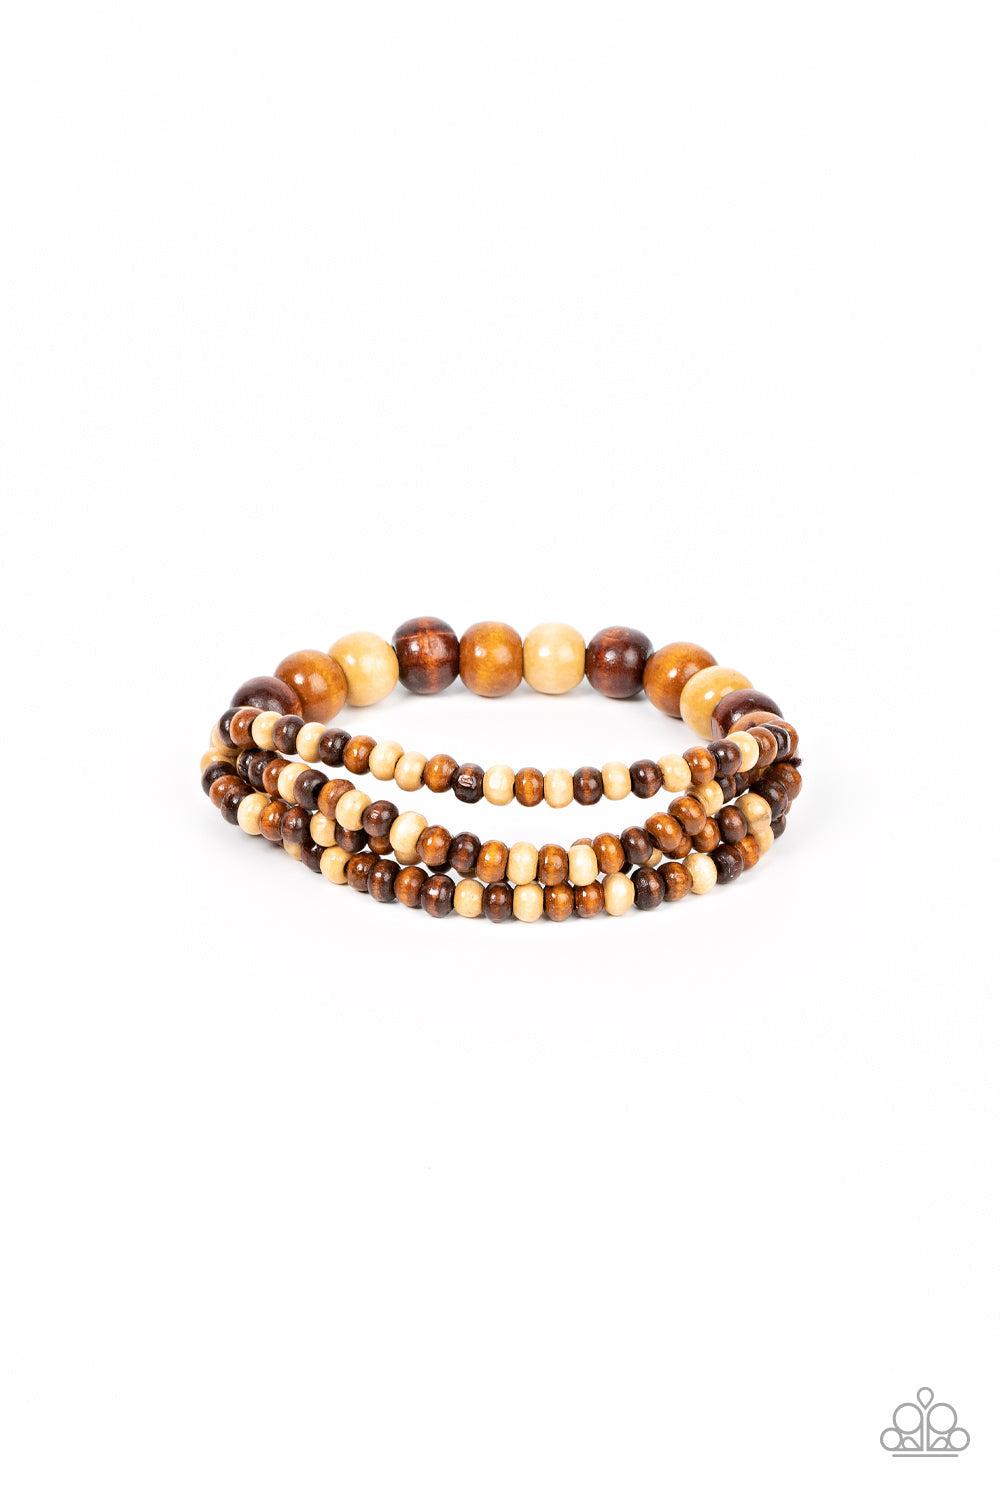 Oceania Oasis Brown Wood Bracelet - Paparazzi Accessories- lightbox - CarasShop.com - $5 Jewelry by Cara Jewels